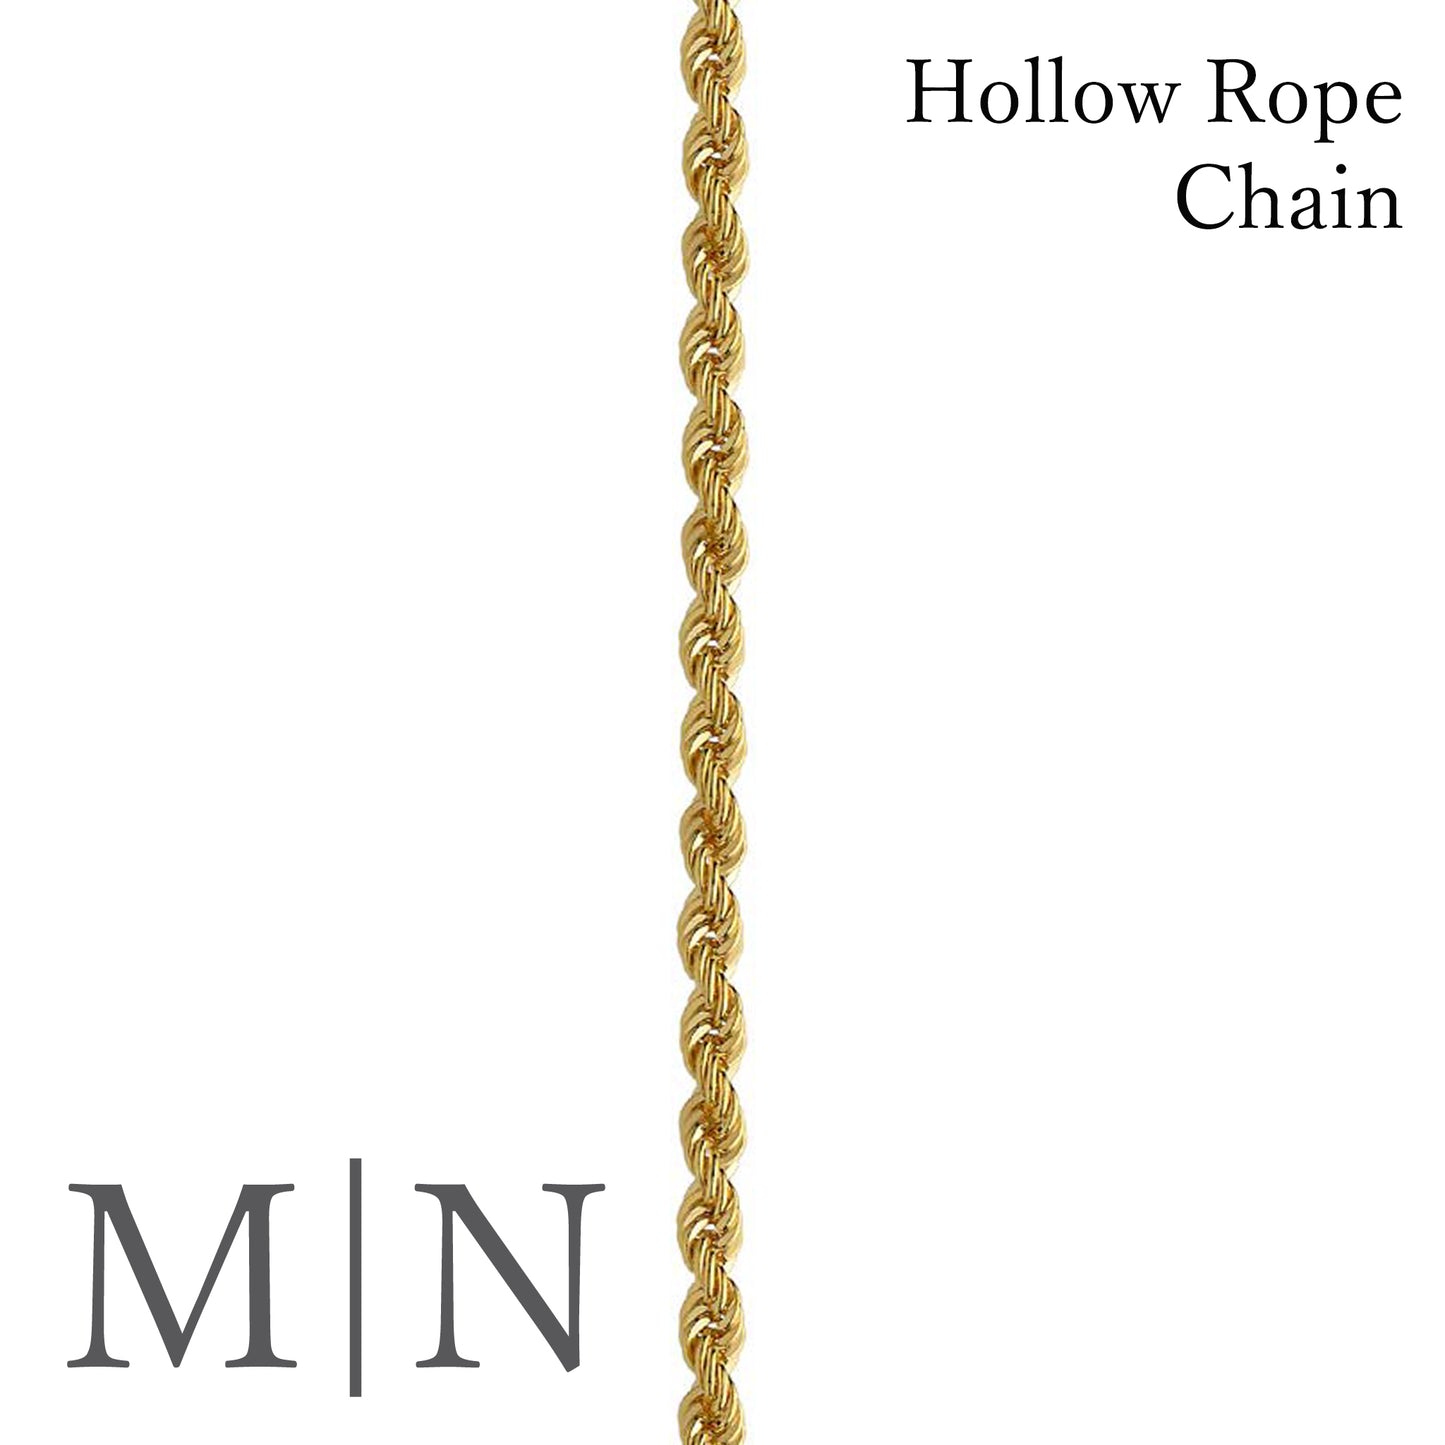 Hollow Rope Chains